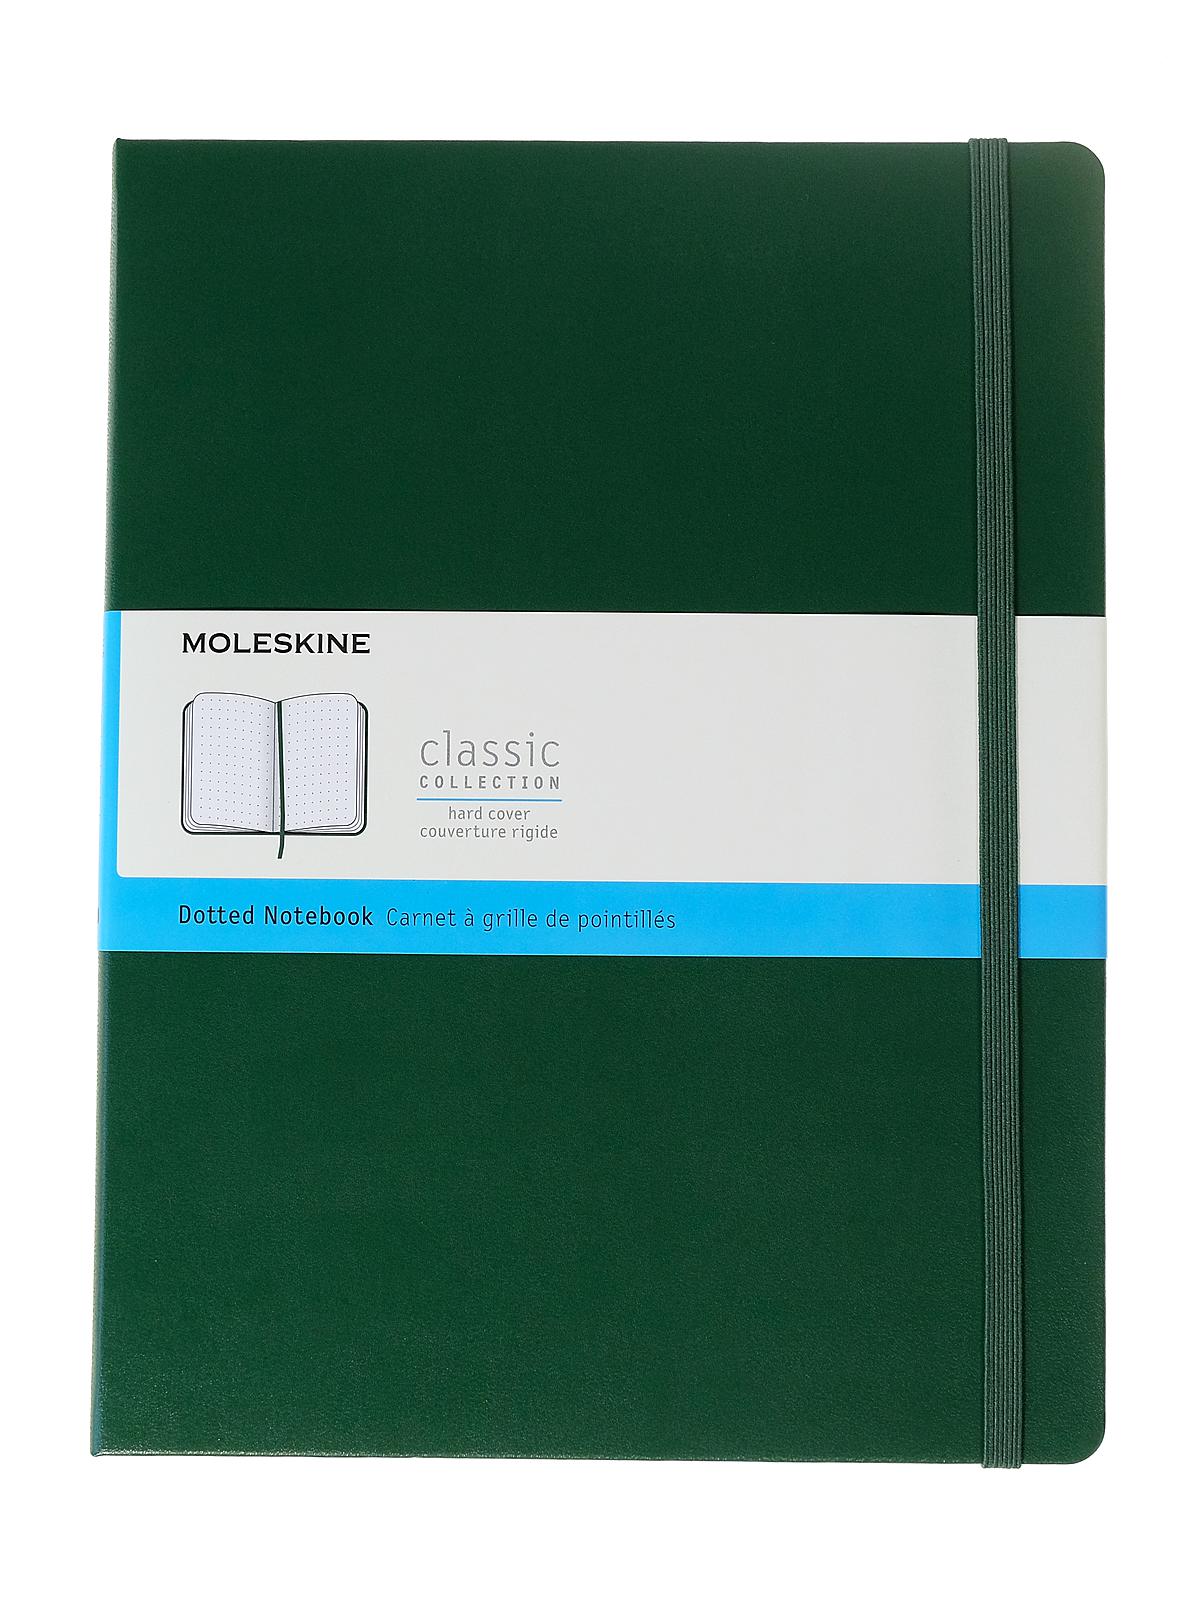 Classic Hard Cover Notebooks Myrtle Green 7 1 2 In. X 9 3 4 In. 192 Pages, Dotted